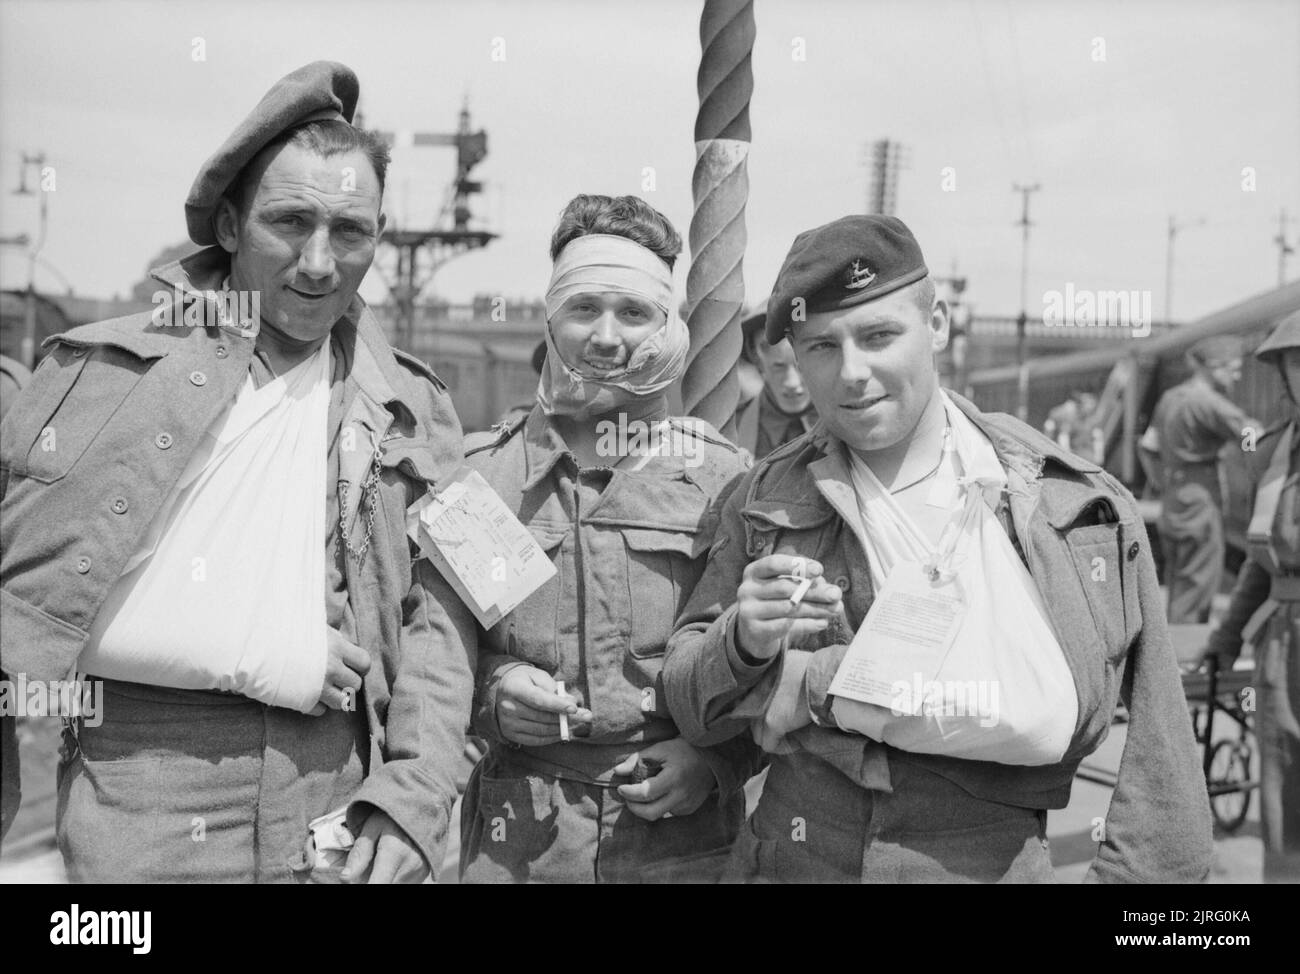 The British Army in the United Kingdom 1939-45 Wounded British troops, evacuated from the Normandy beaches, now back in Britain, 7 June 1944. Stock Photo